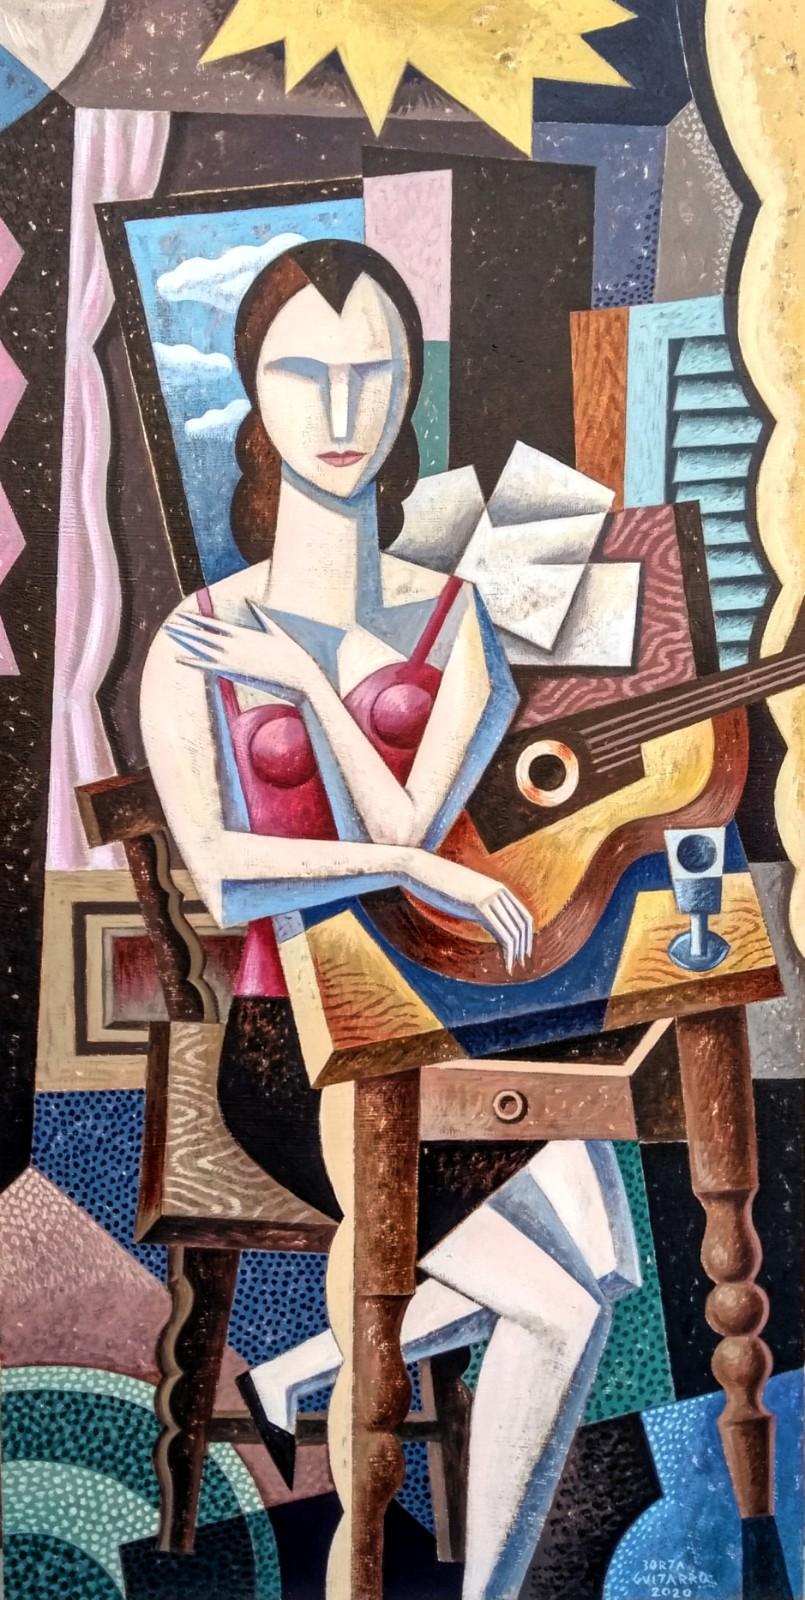 Amelie with Guitar-original new cubism figurative still life life painting- Art